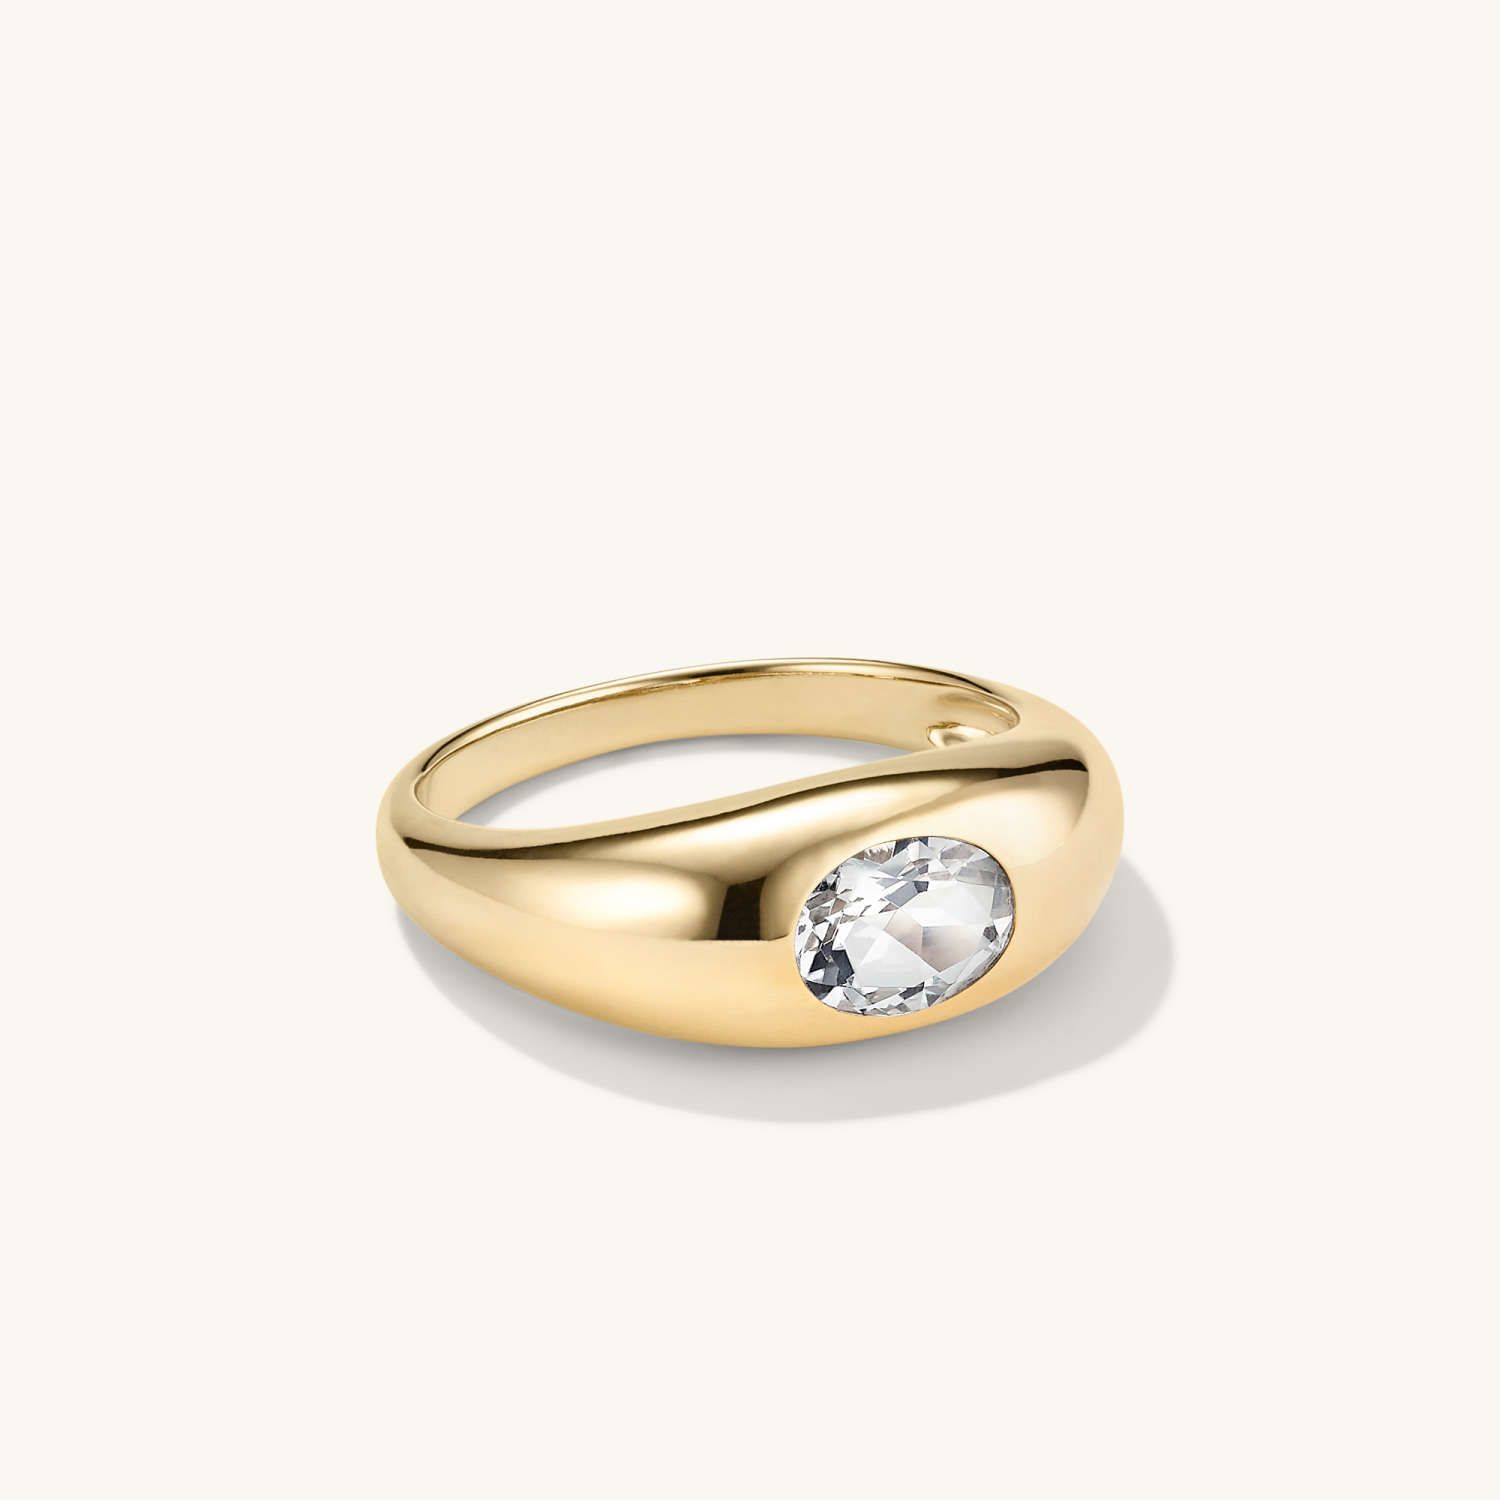 Candy Dôme Oval Ring : Handcrafted in 18k Gold Vermeil | Mejuri | Mejuri (Global)